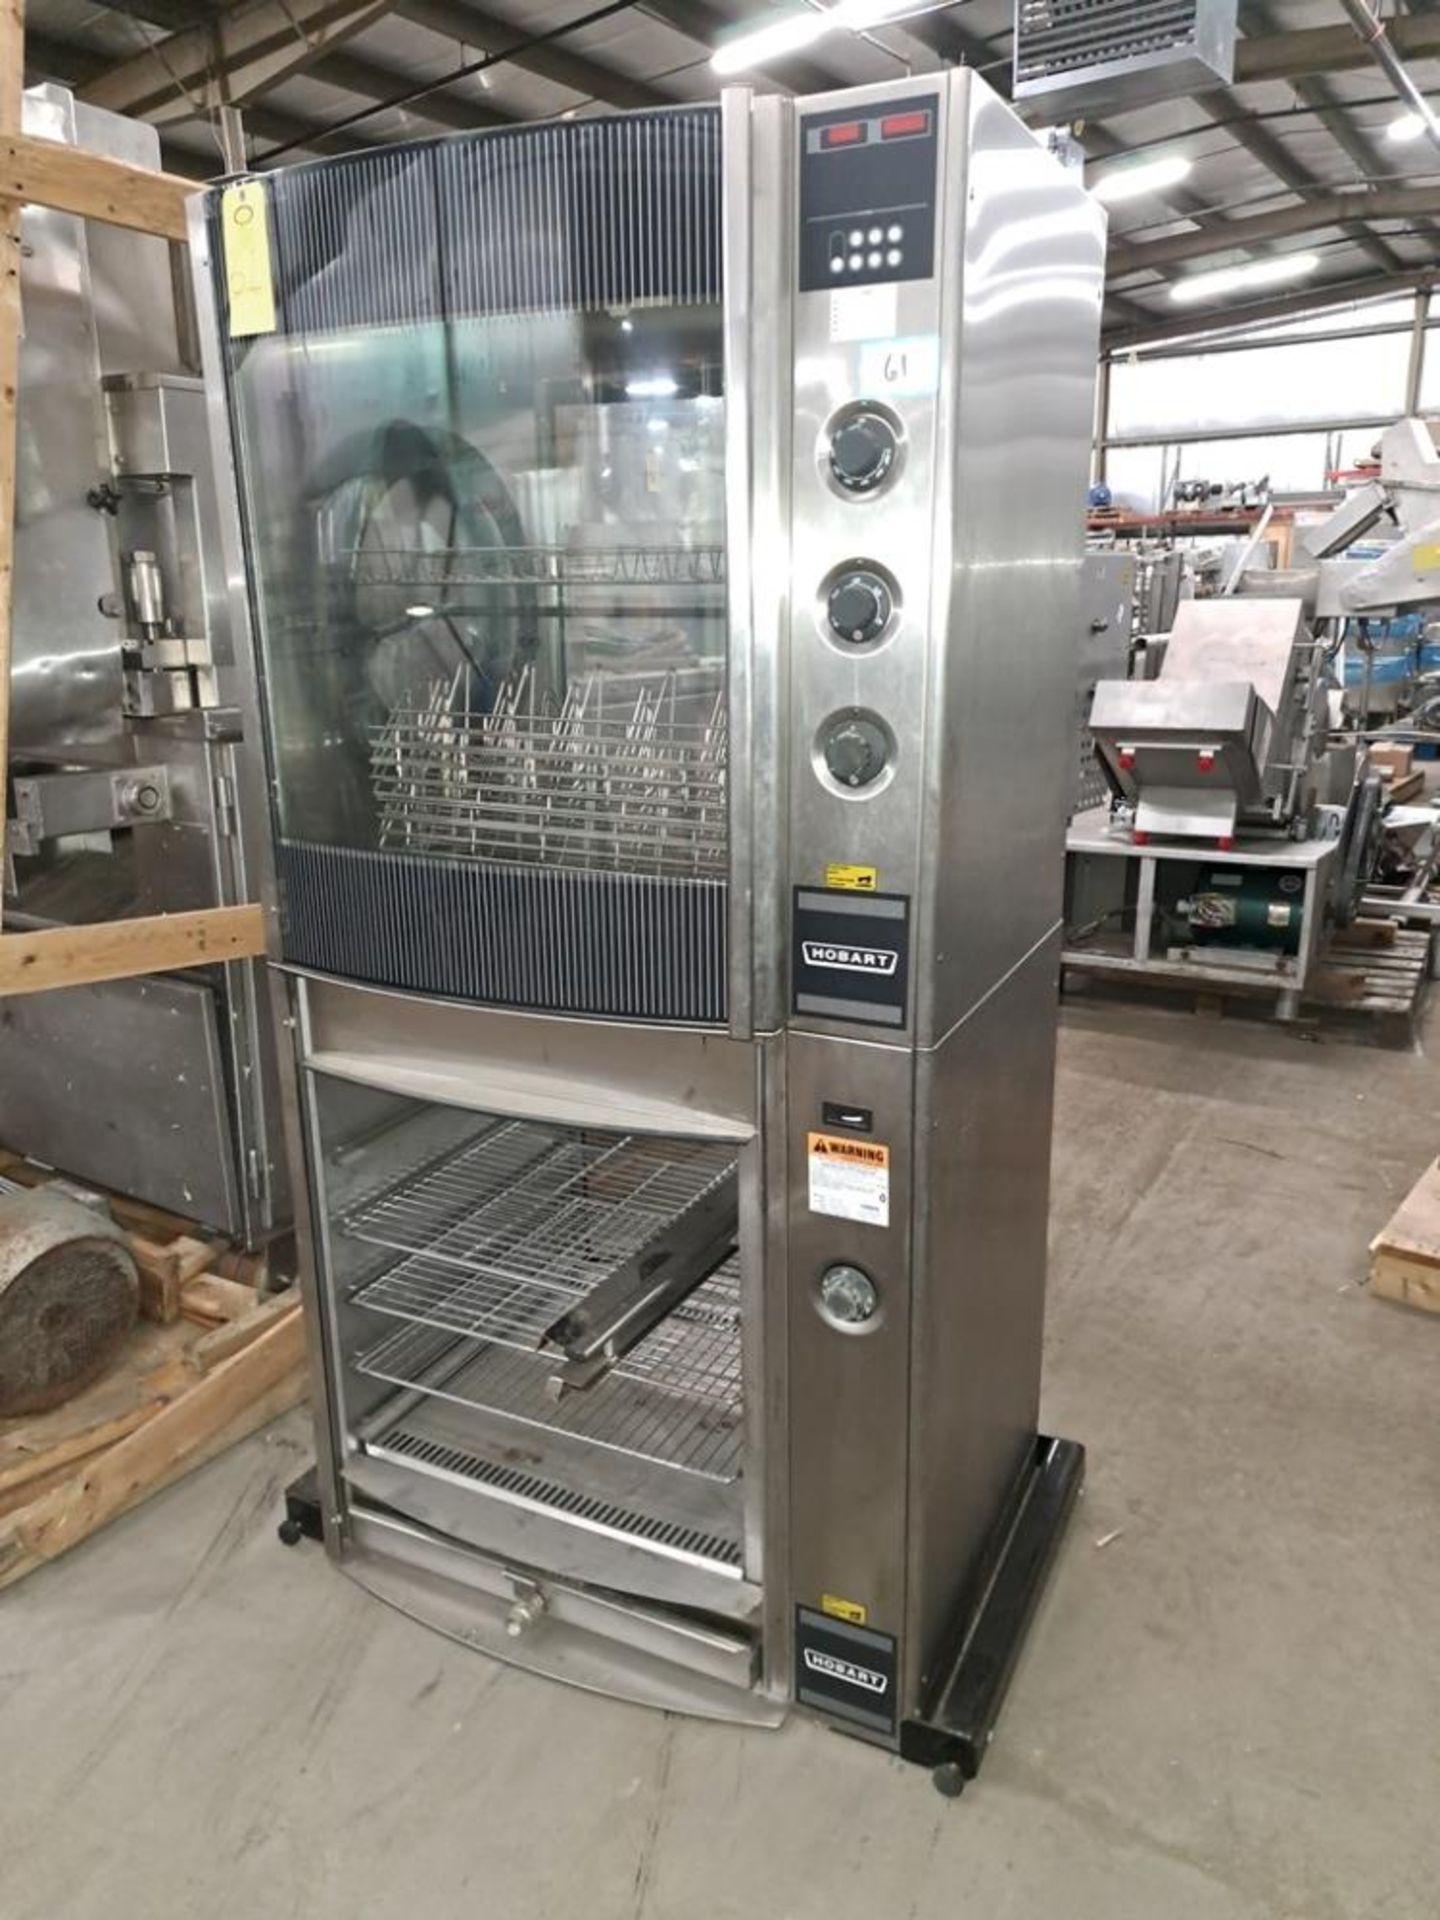 Hobart Mdl. HR7 Rotisserie Oven, Ser. #750012656, 208 volts, 1/3 phase, with storage (missing glass)